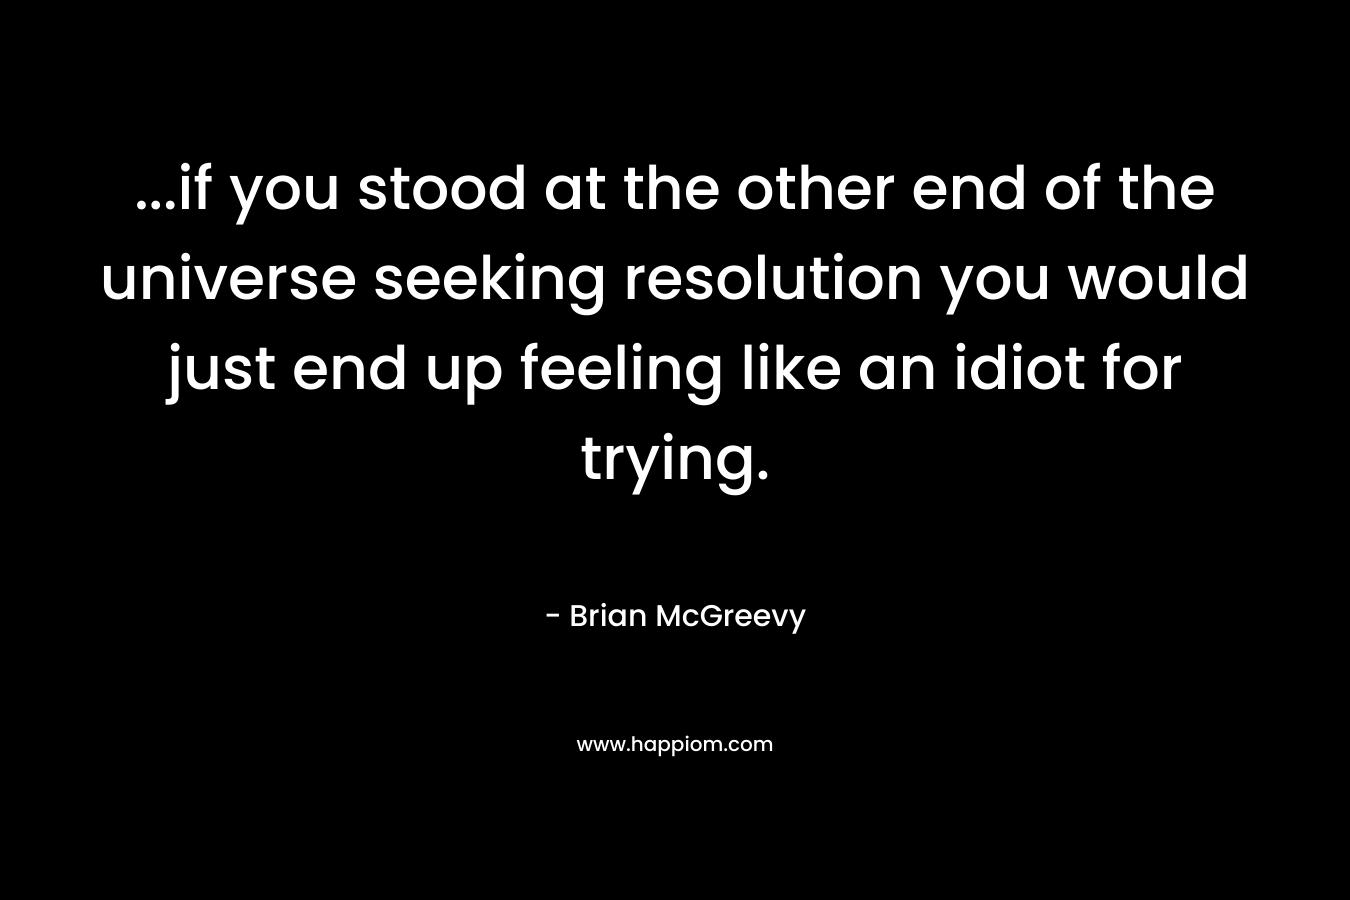 …if you stood at the other end of the universe seeking resolution you would just end up feeling like an idiot for trying. – Brian McGreevy